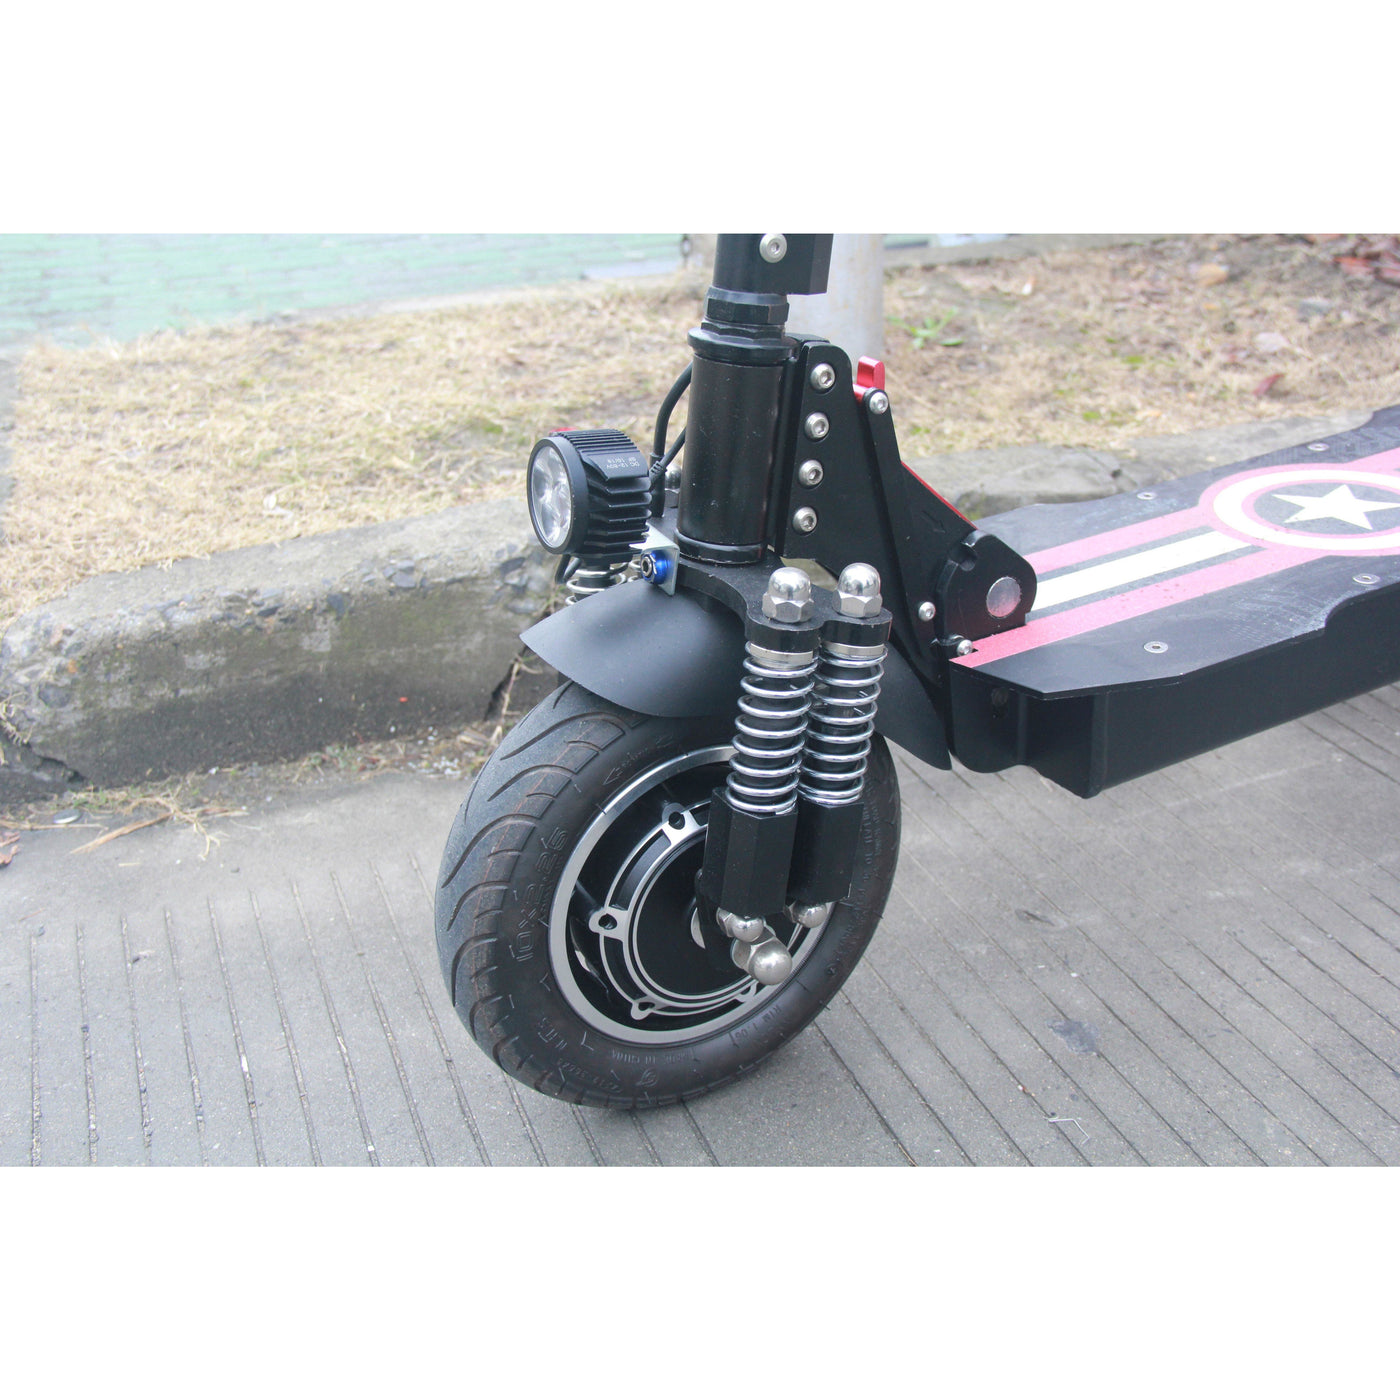 CoolFly-T10-1000w 48v 3 Wheel Folding Electric Scooter